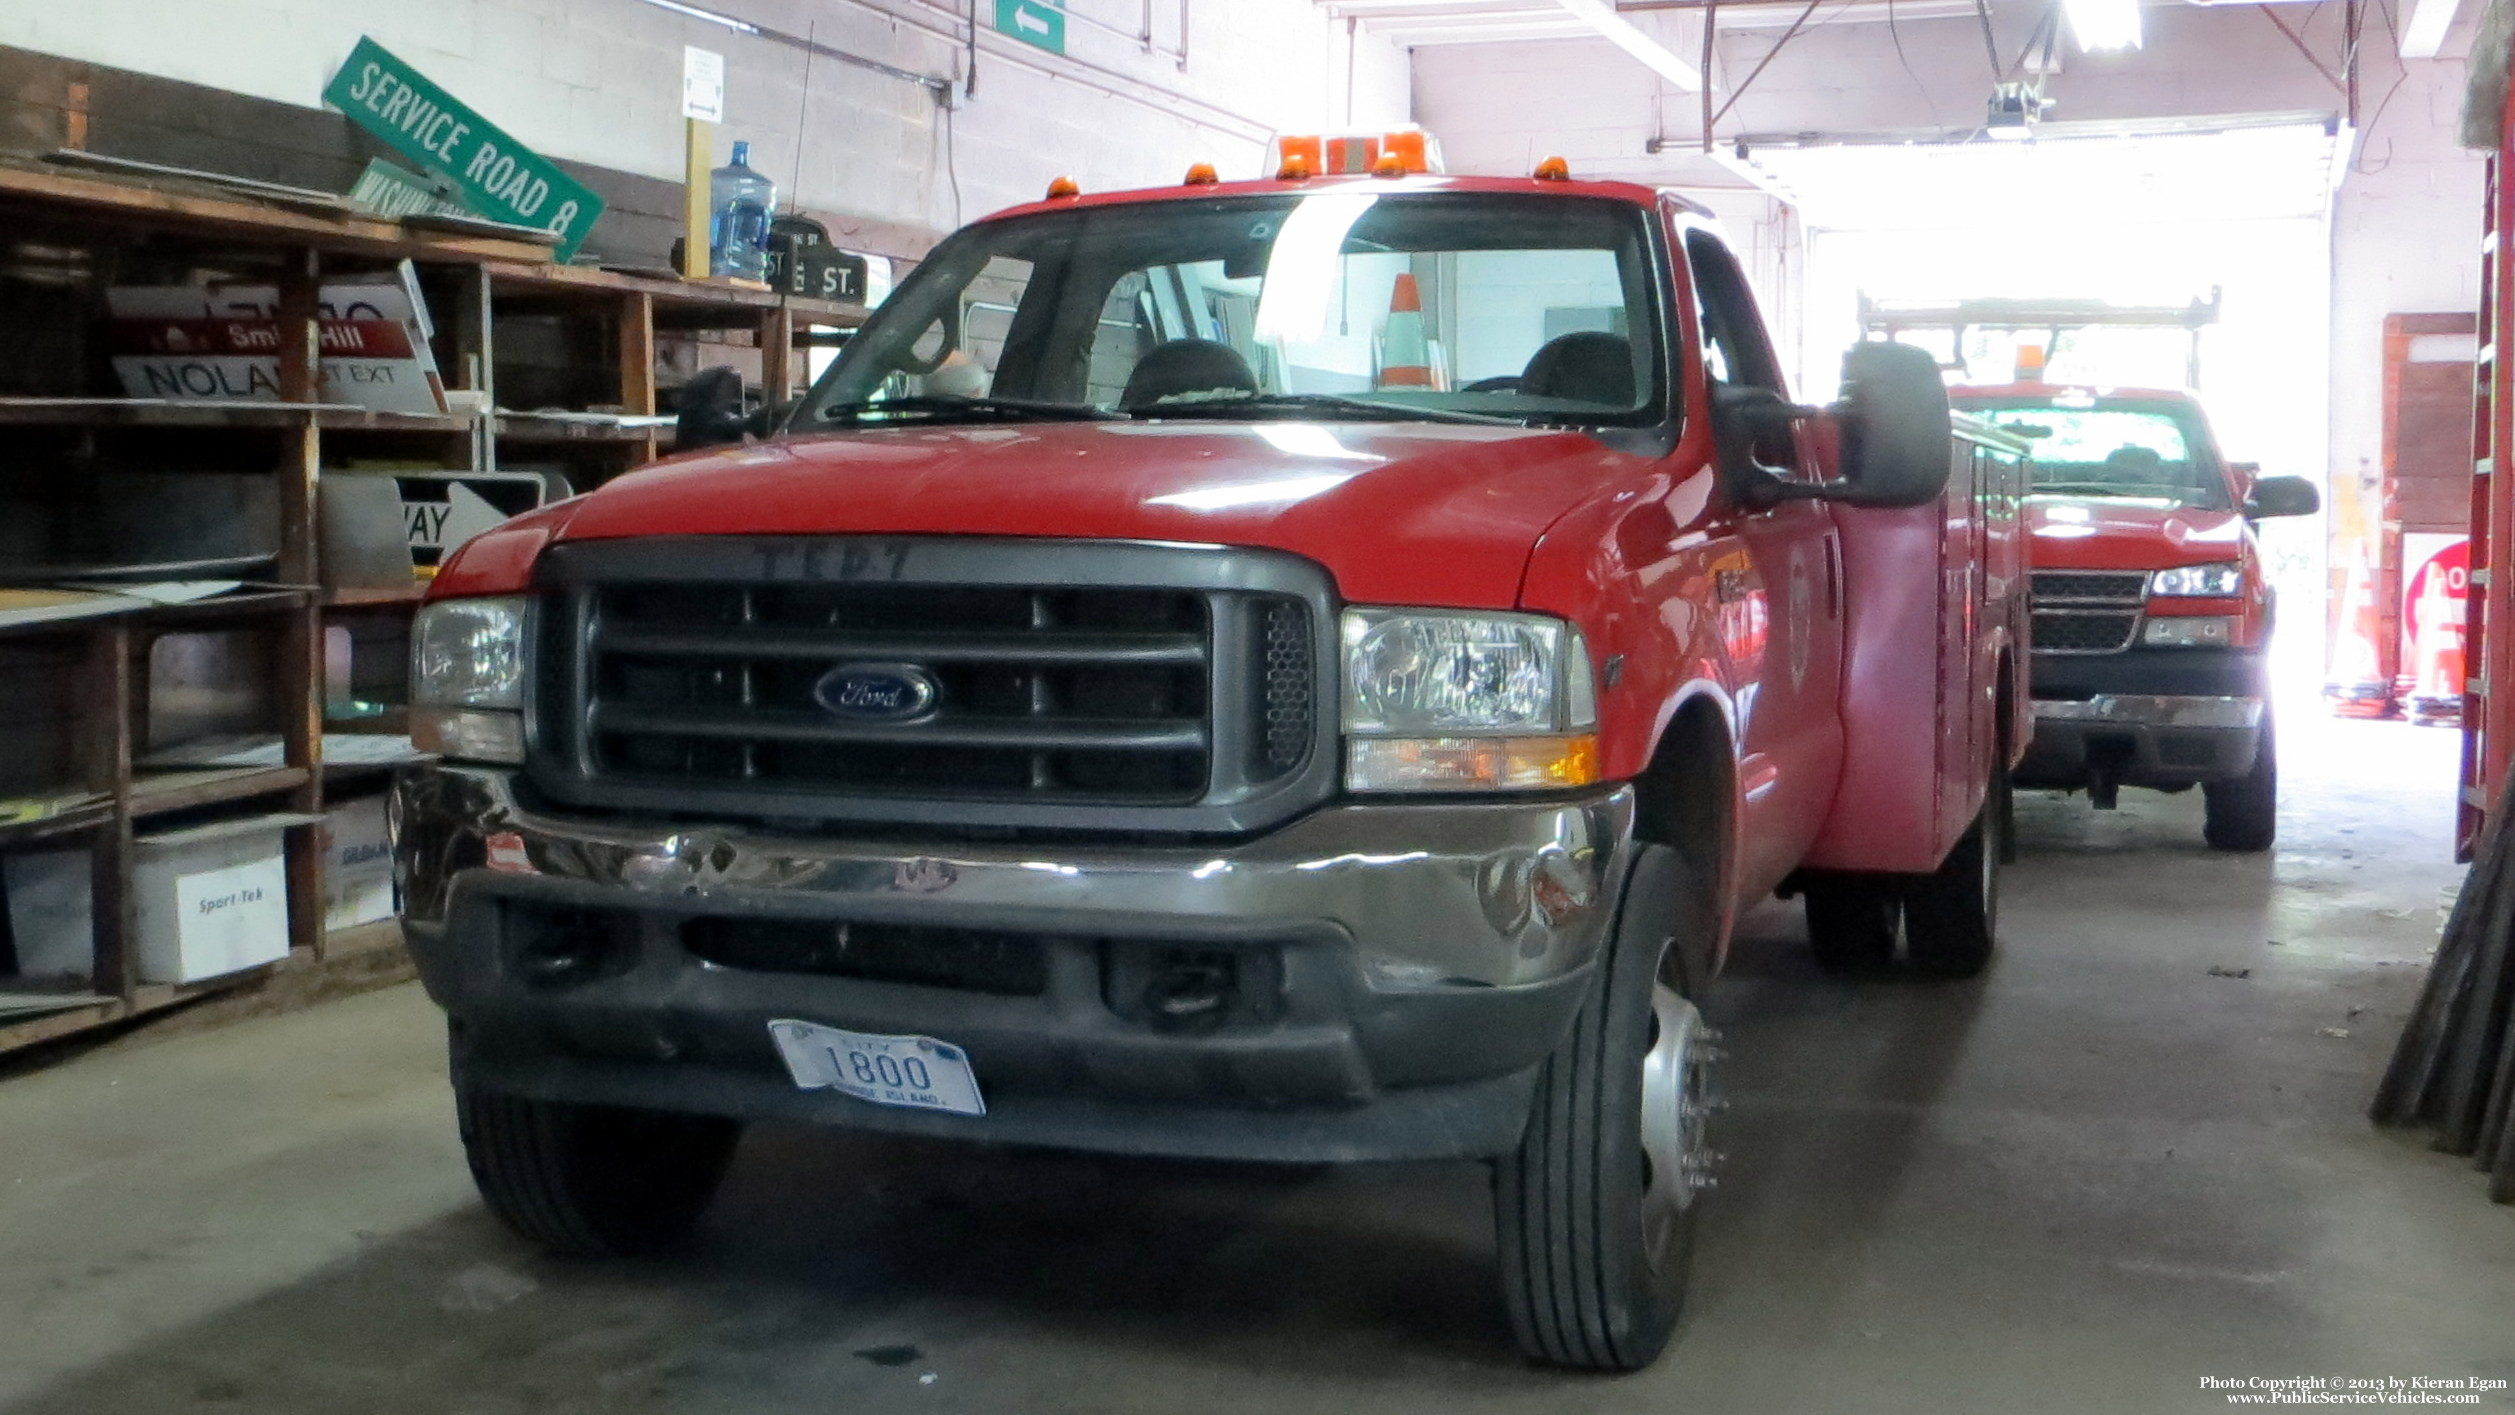 A photo  of Providence Traffic Engineering Division
            Truck 1800, a 1999-2004 Ford F-450             taken by Kieran Egan